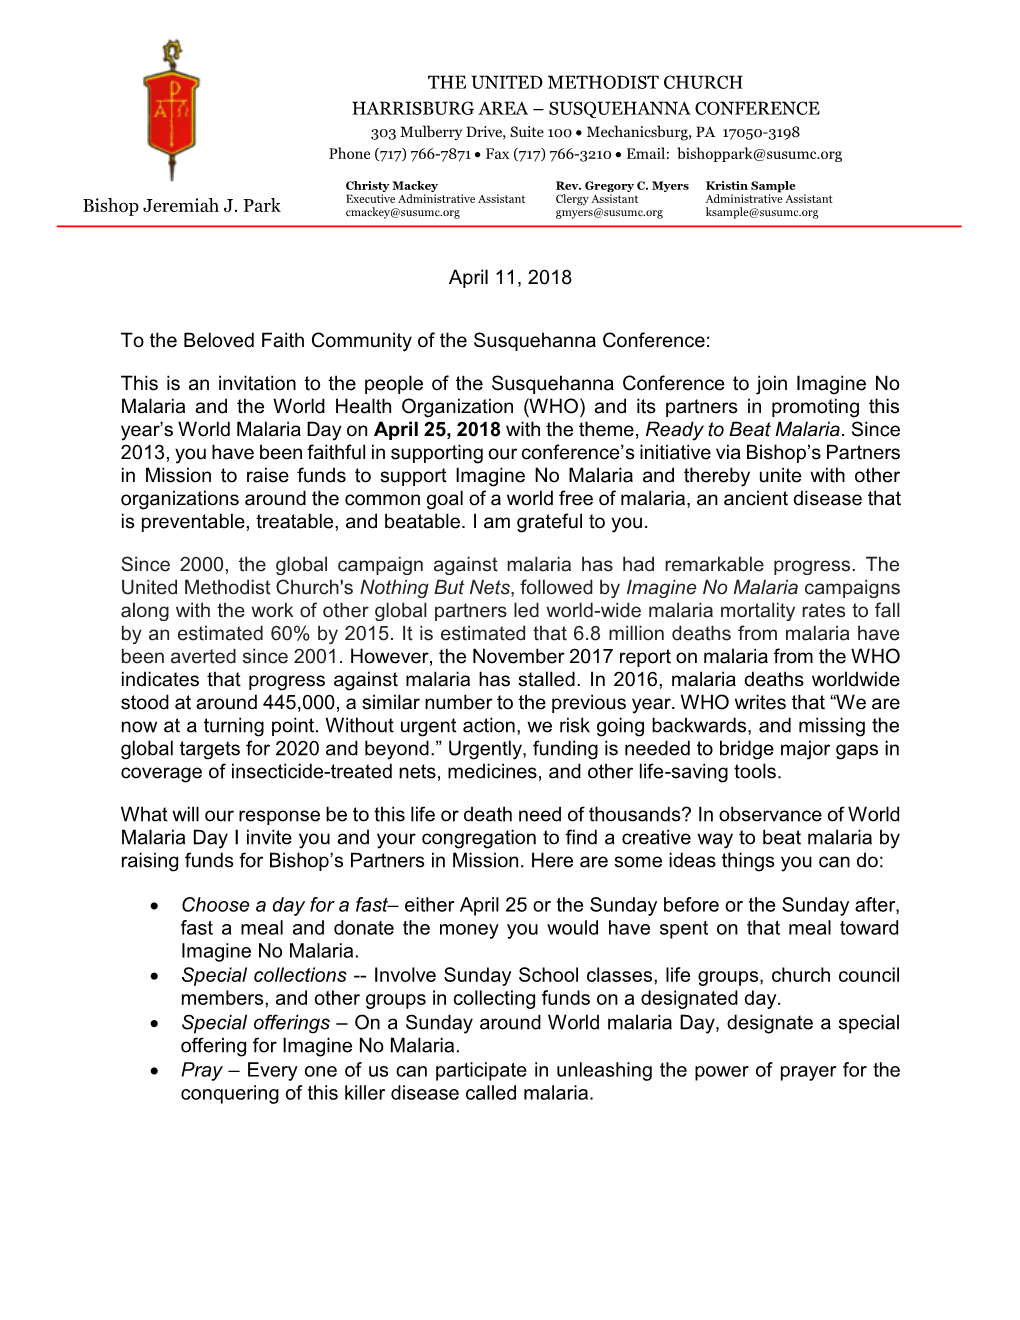 April 11, 2018 to the Beloved Faith Community of the Susquehanna Conference: This Is an Invitation to the People of the Susqueha